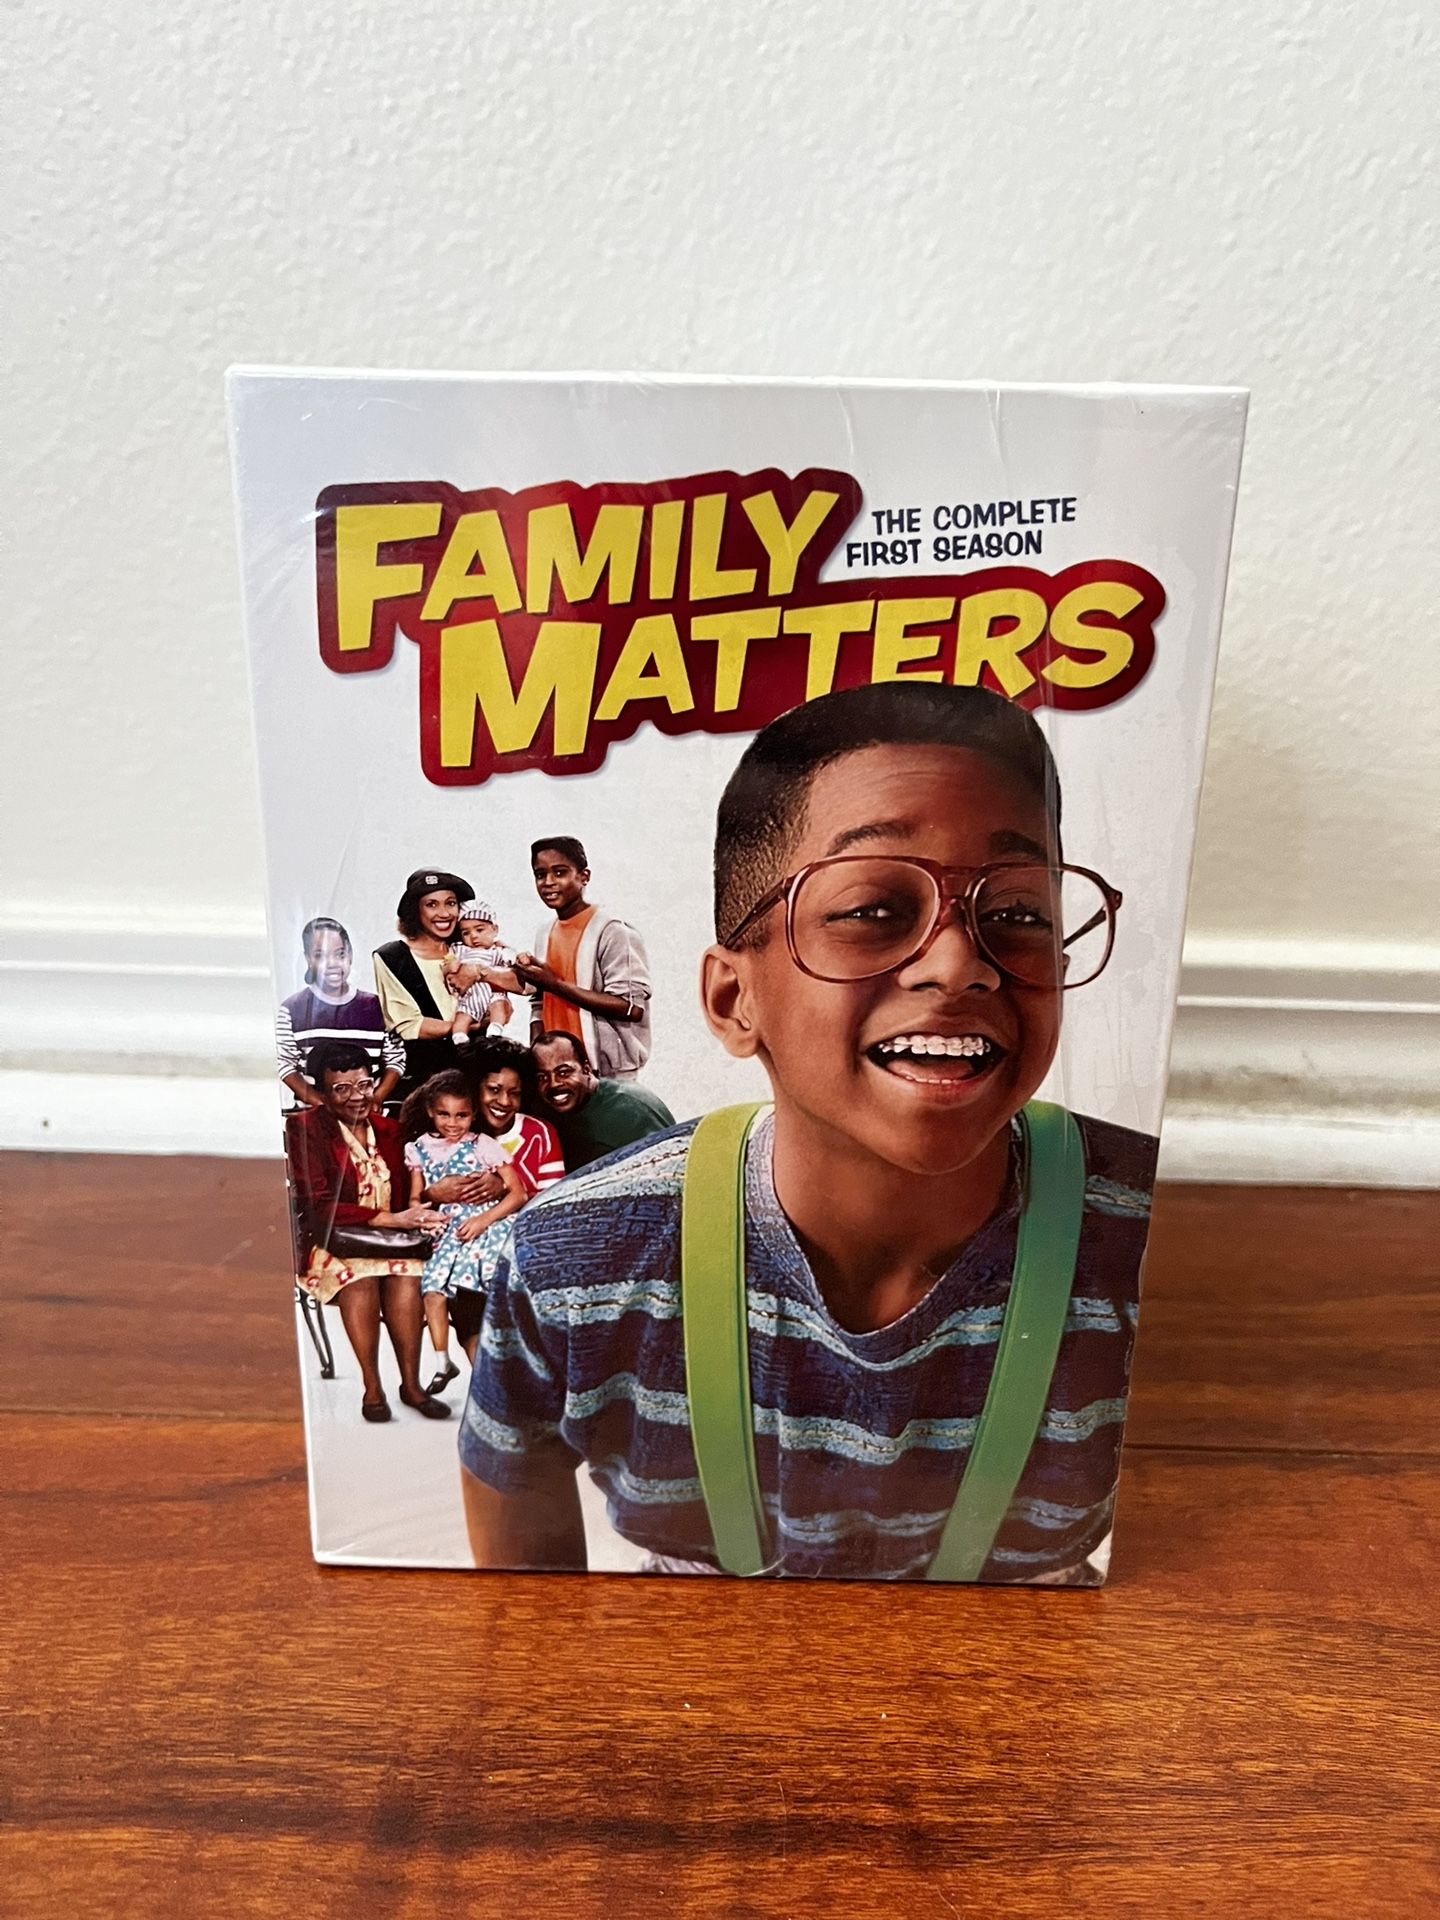 Family Matters: The Complete Series (DVD)